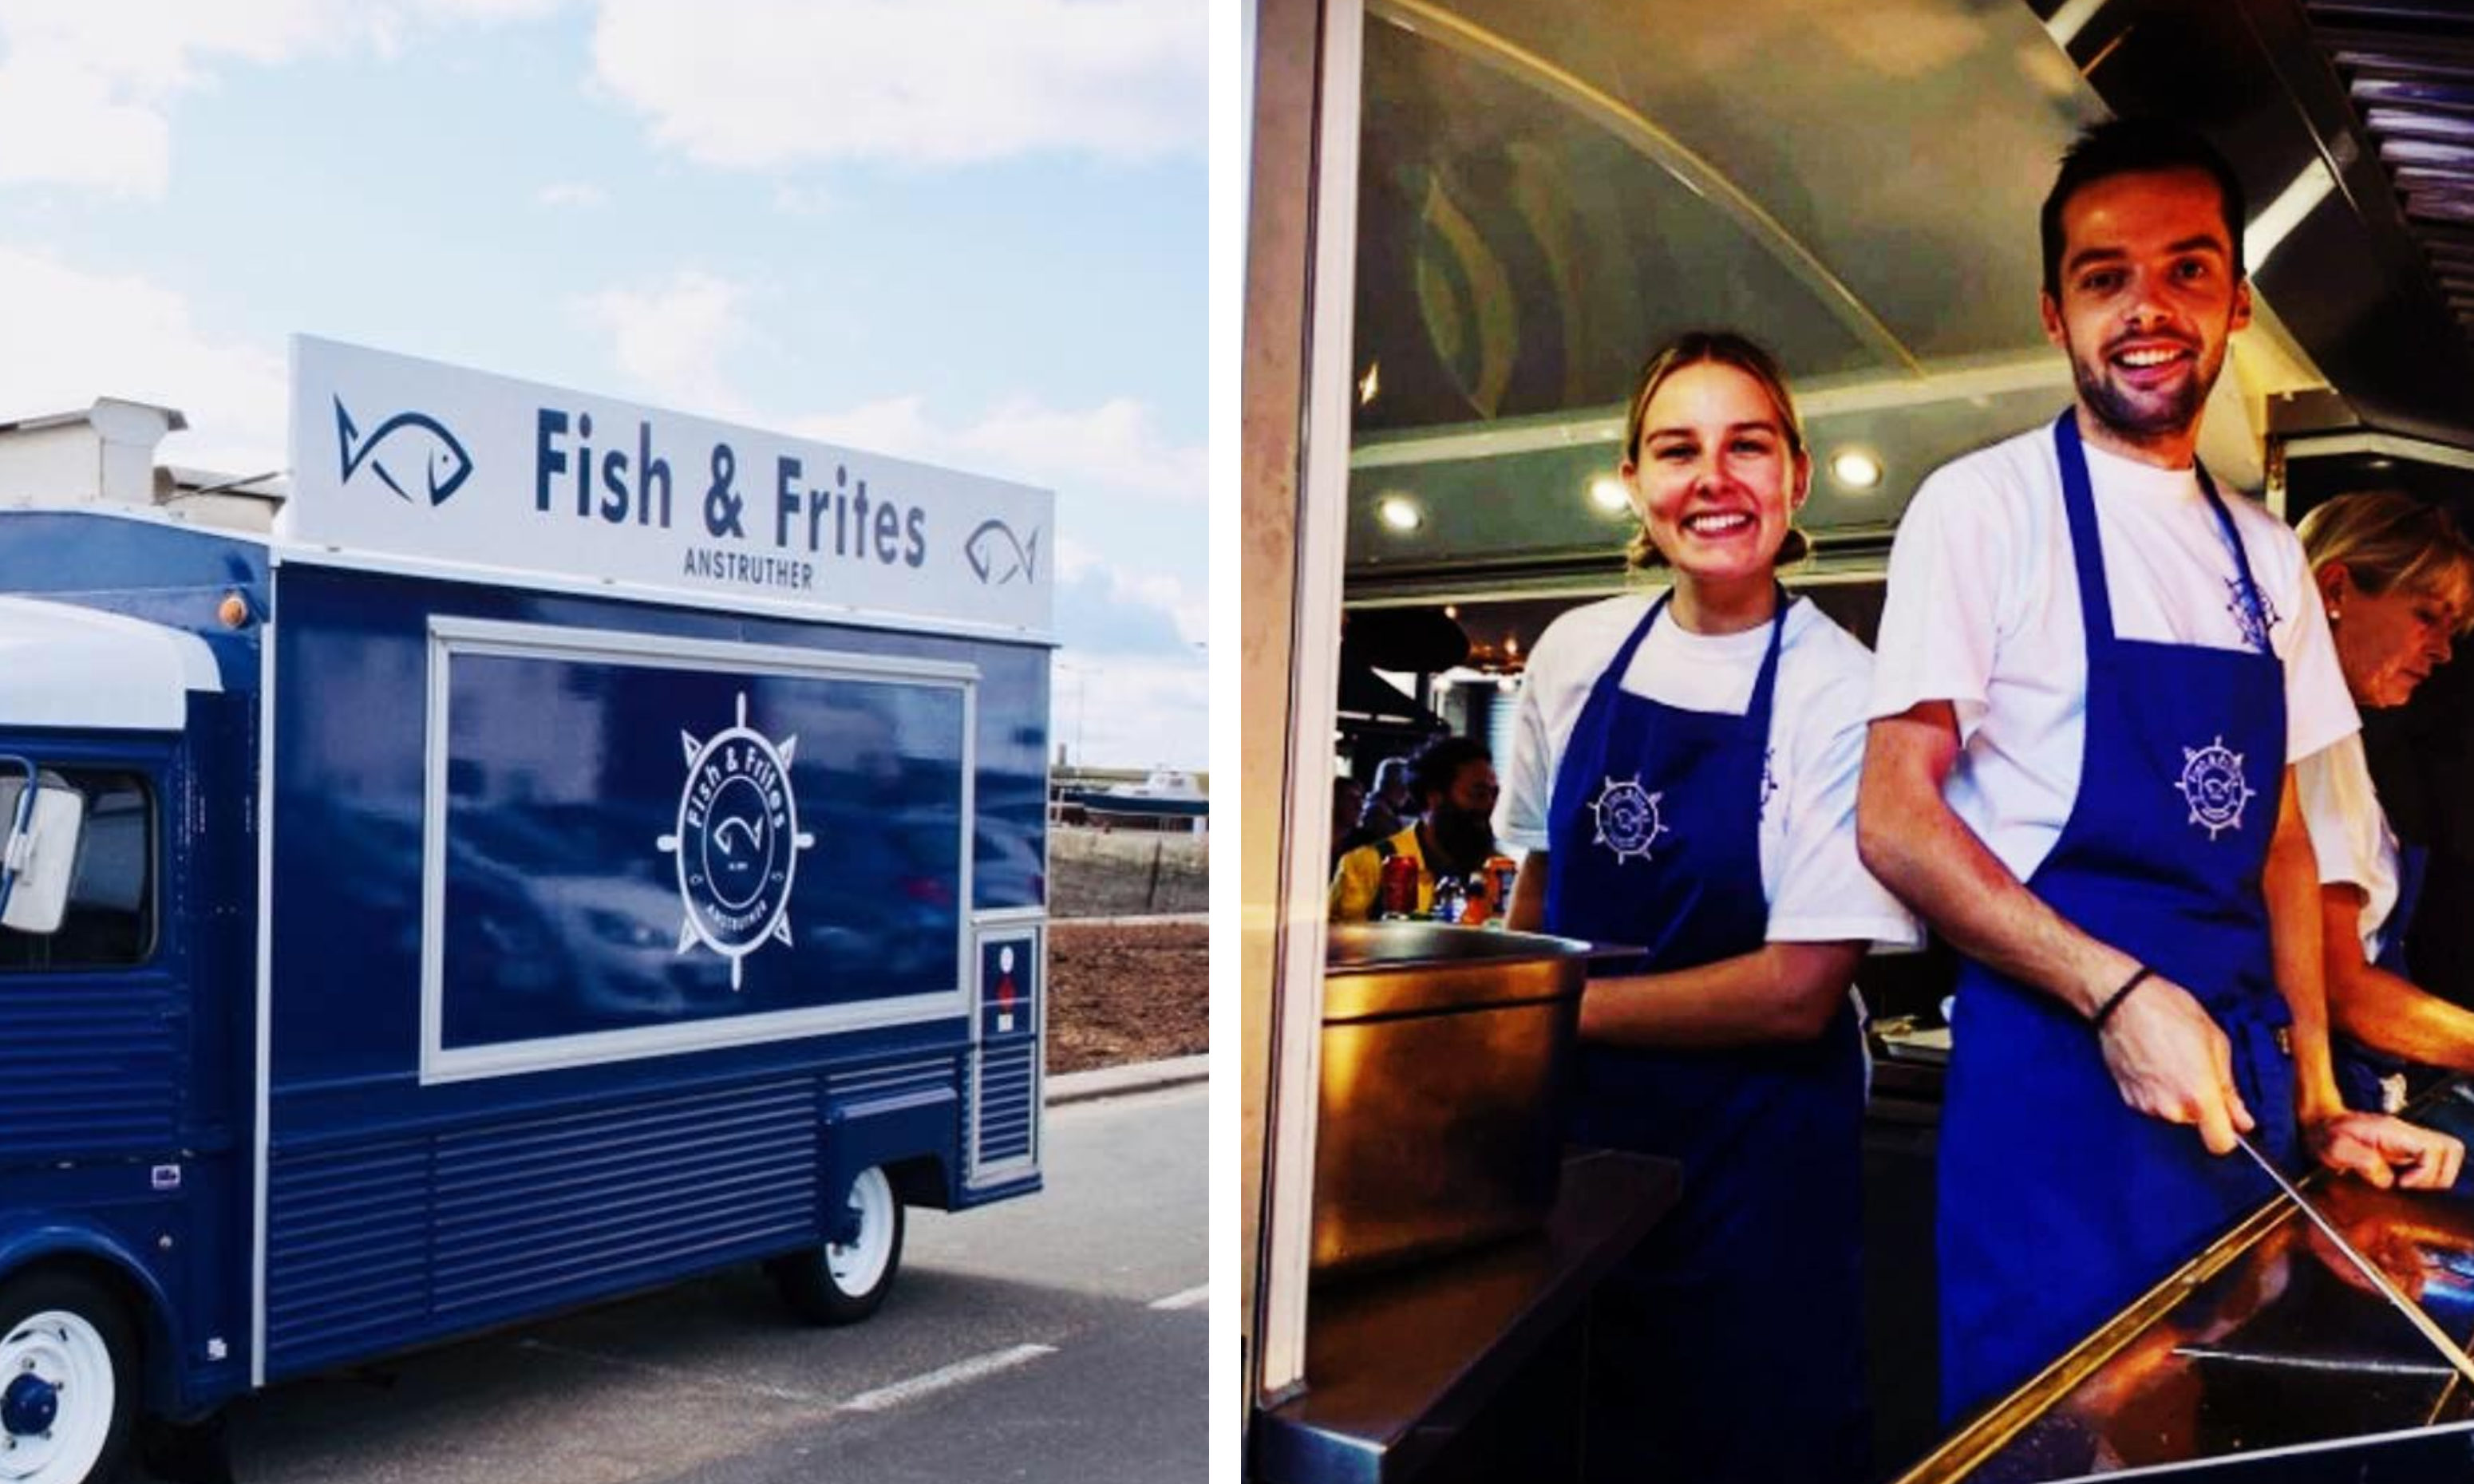 Fish and Frites has been named one of the top three fish and chip vans in the UK.